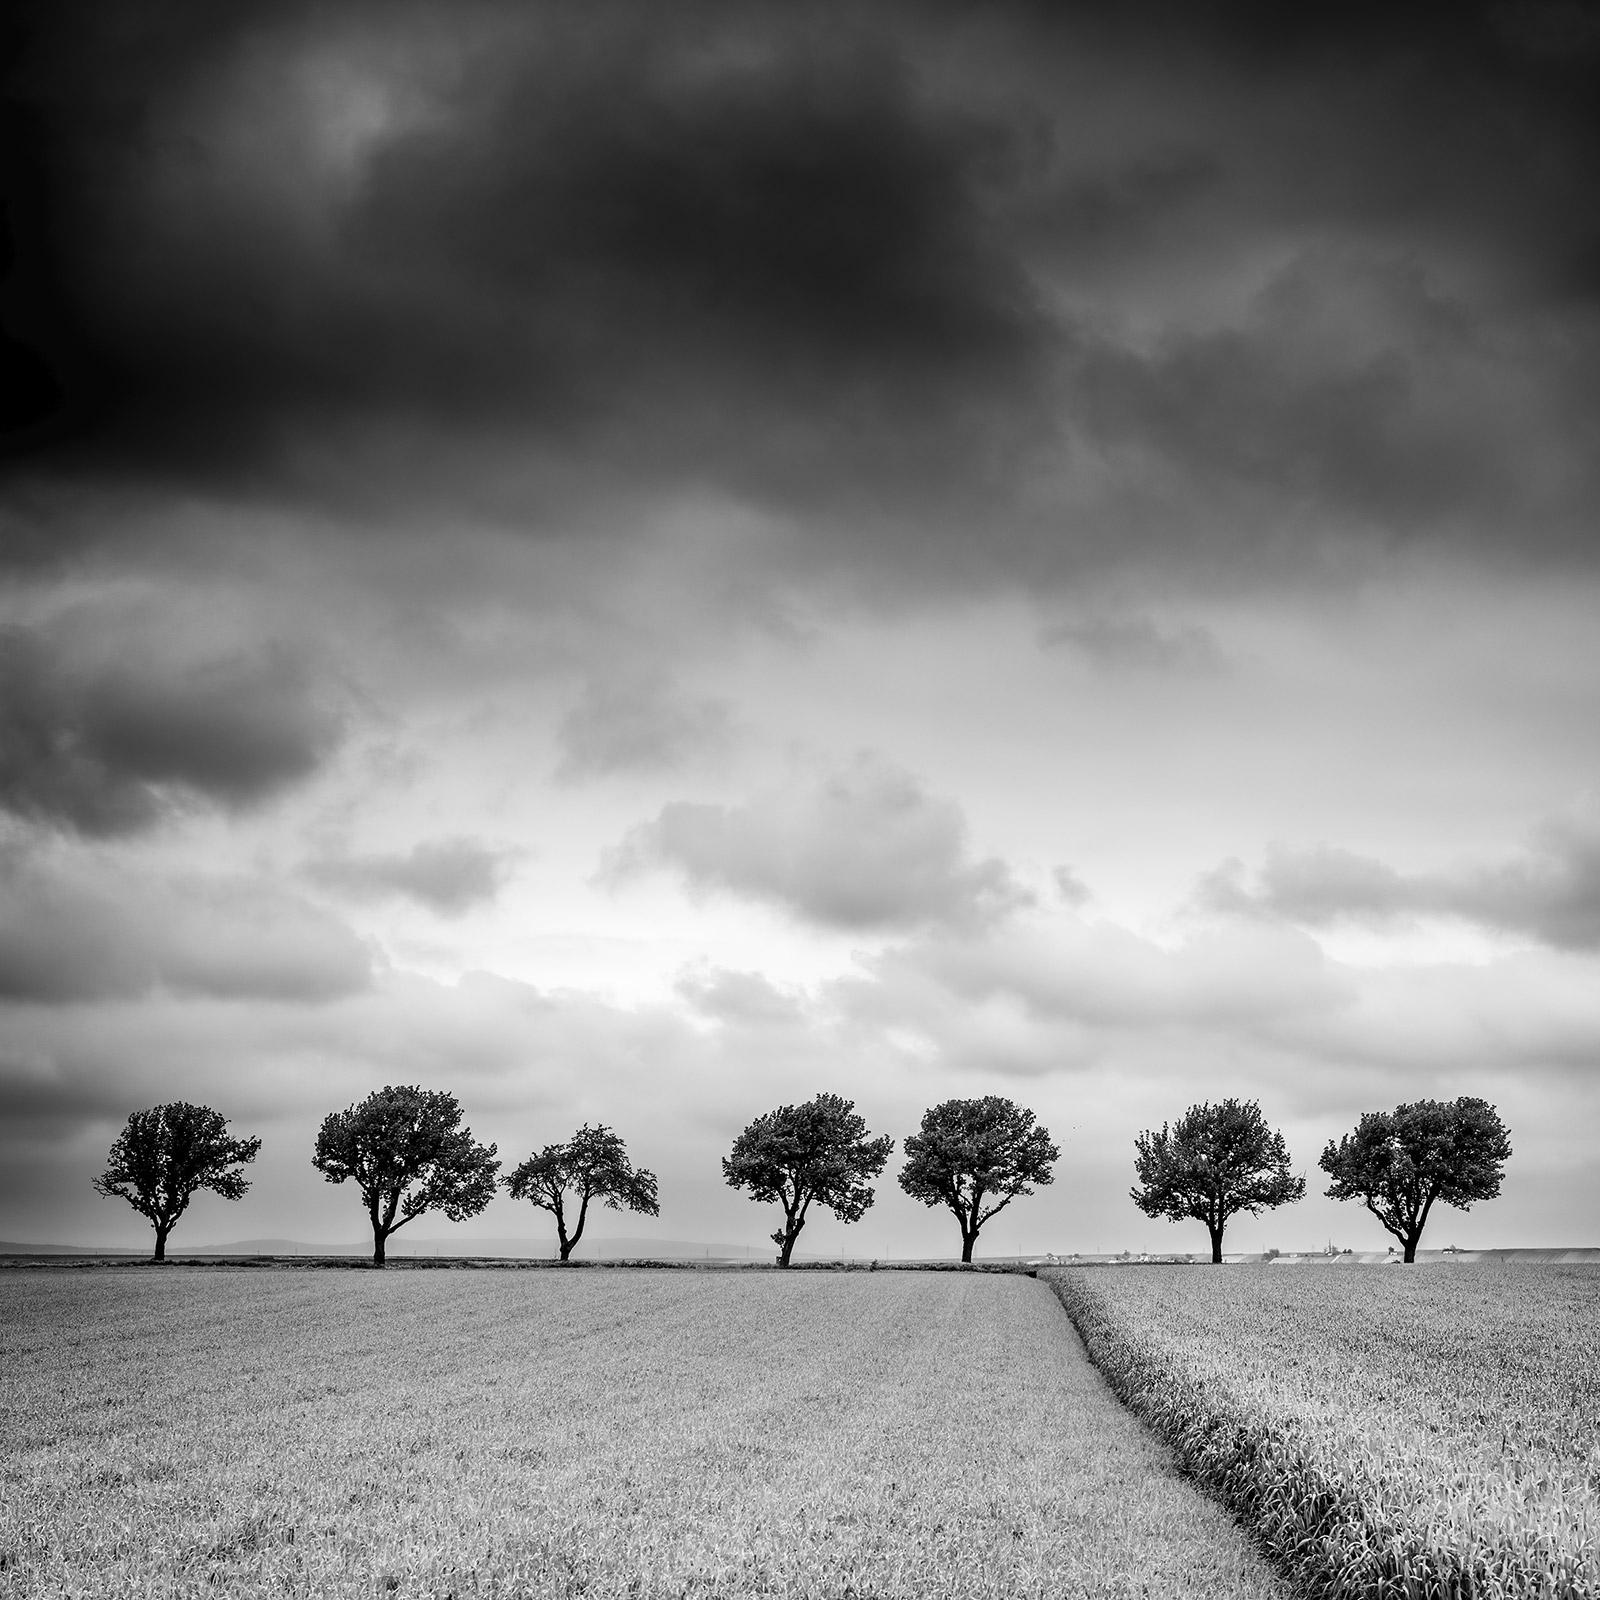 The Trees on the edge of Field, cloudy, storm, black white art landscape photography